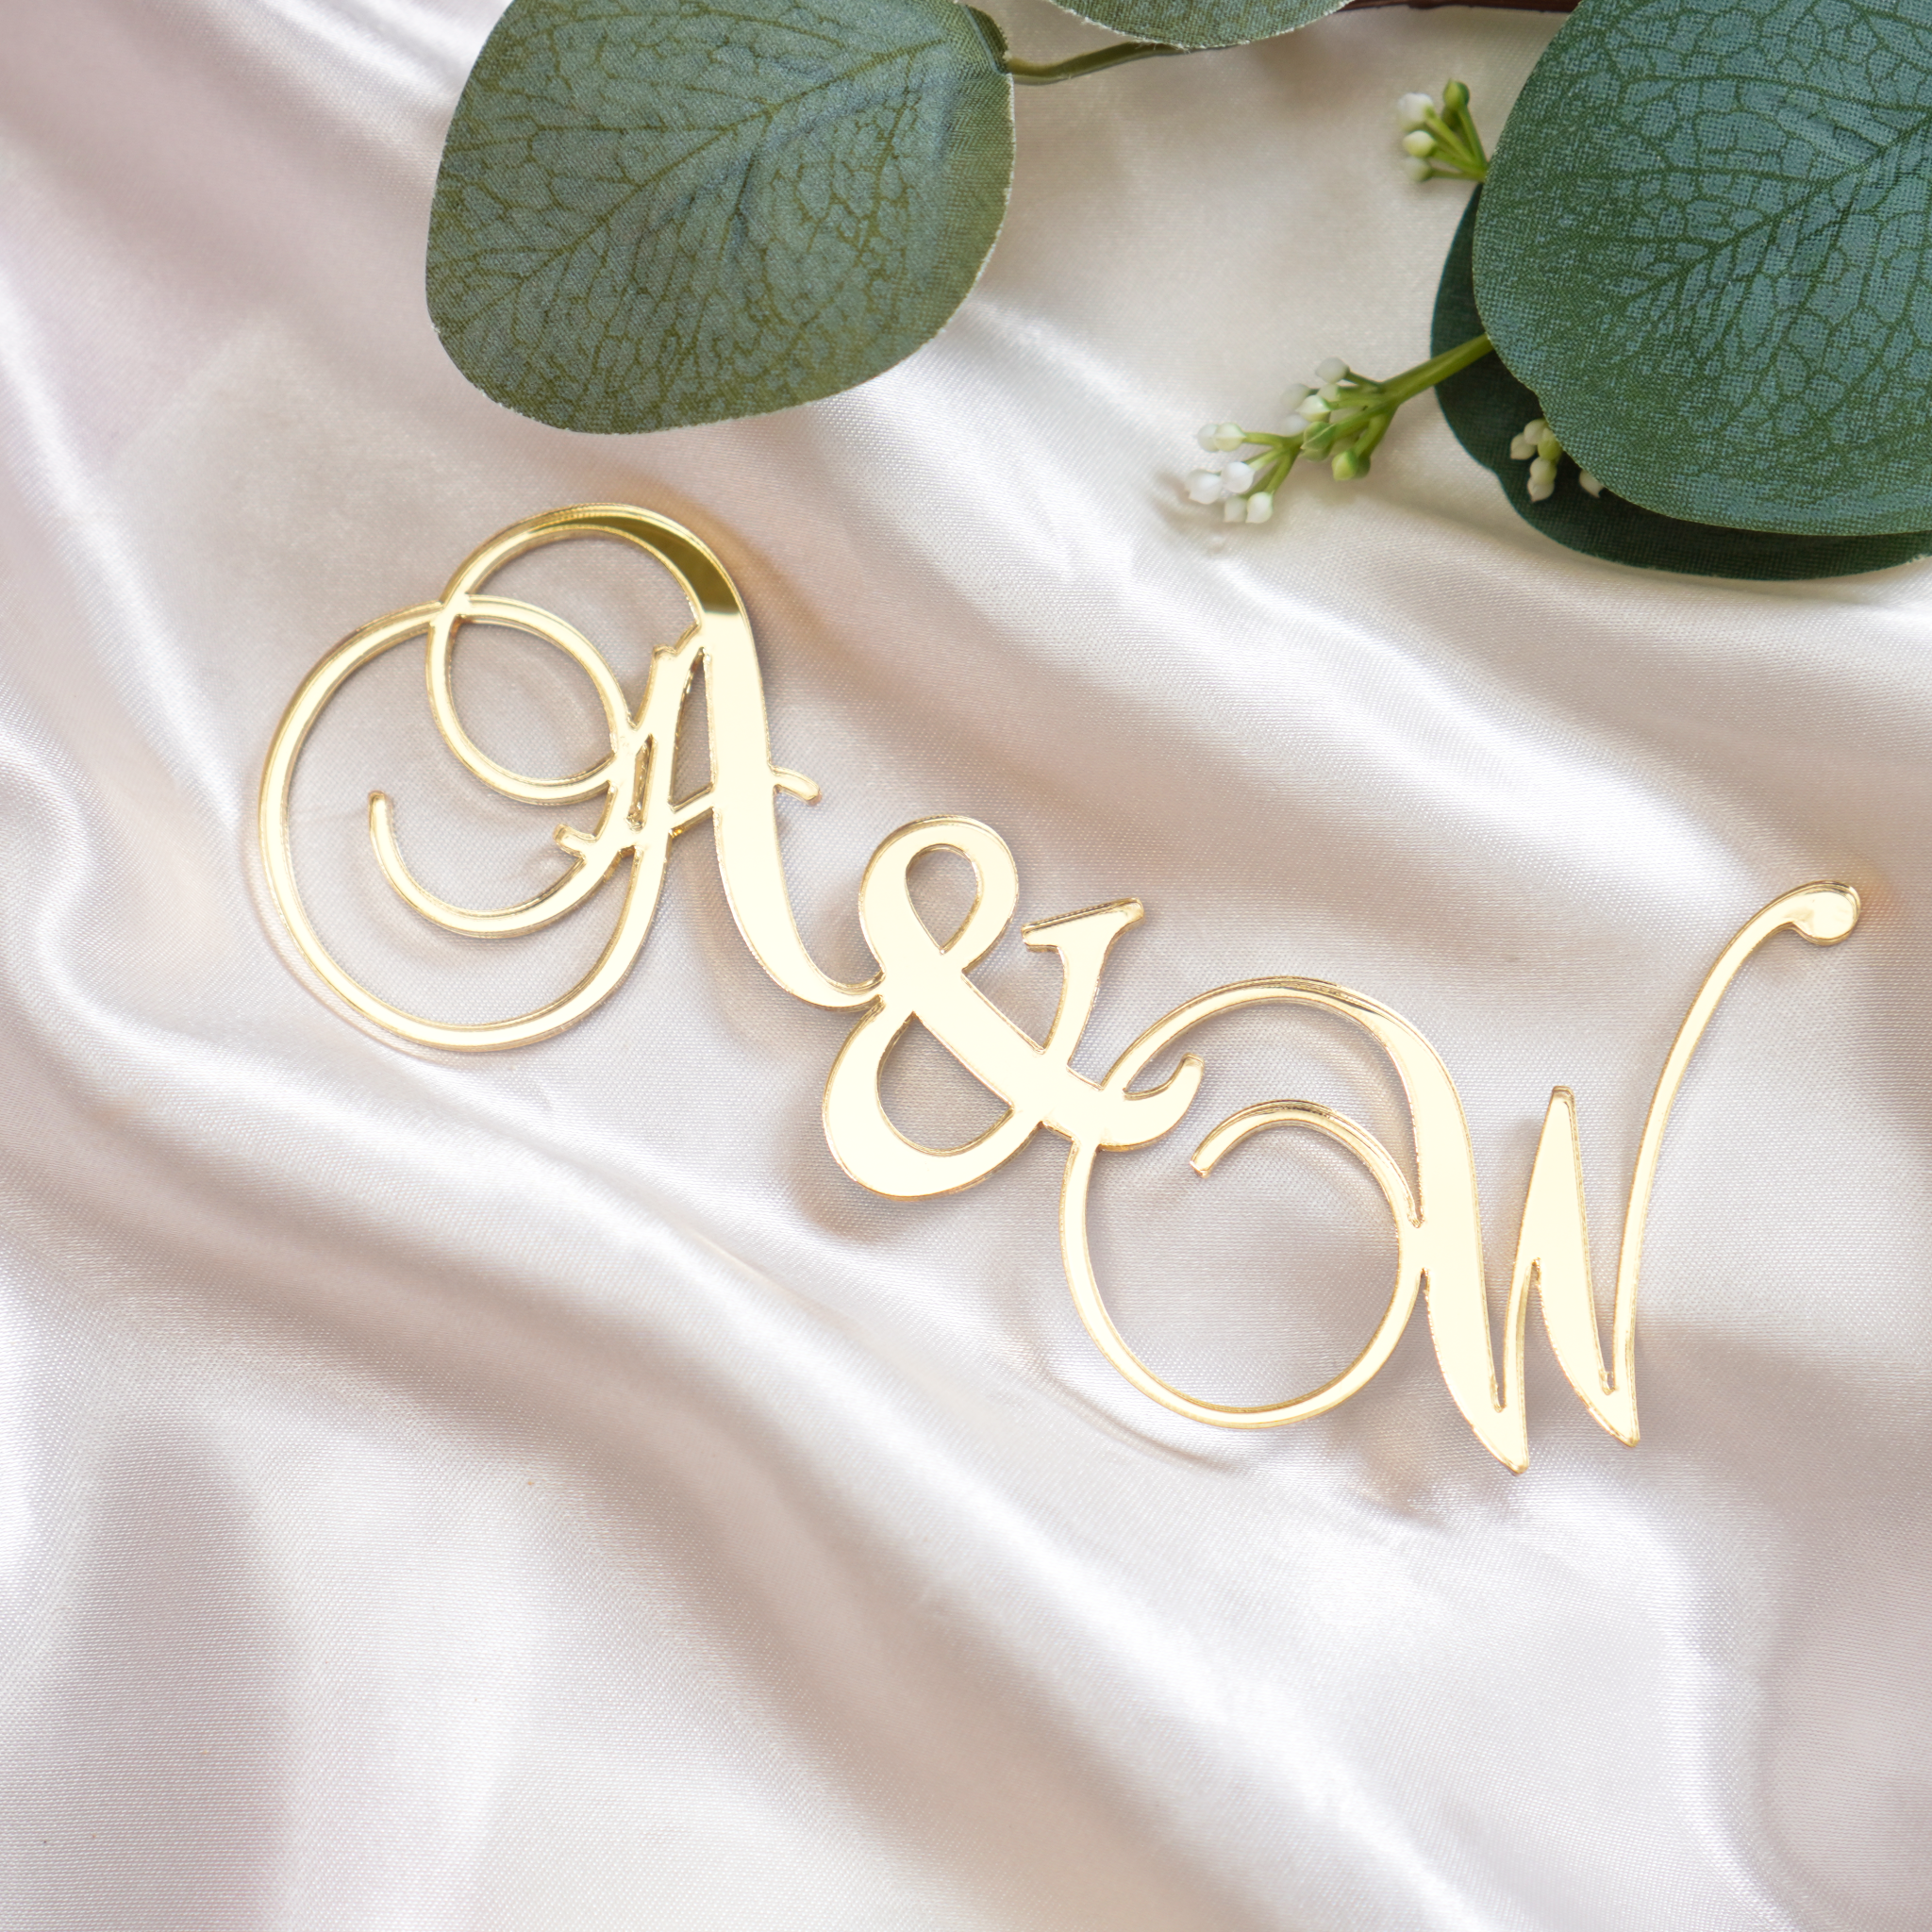 Satin or mirror gold personalised monogram wedding cake letters Toppers